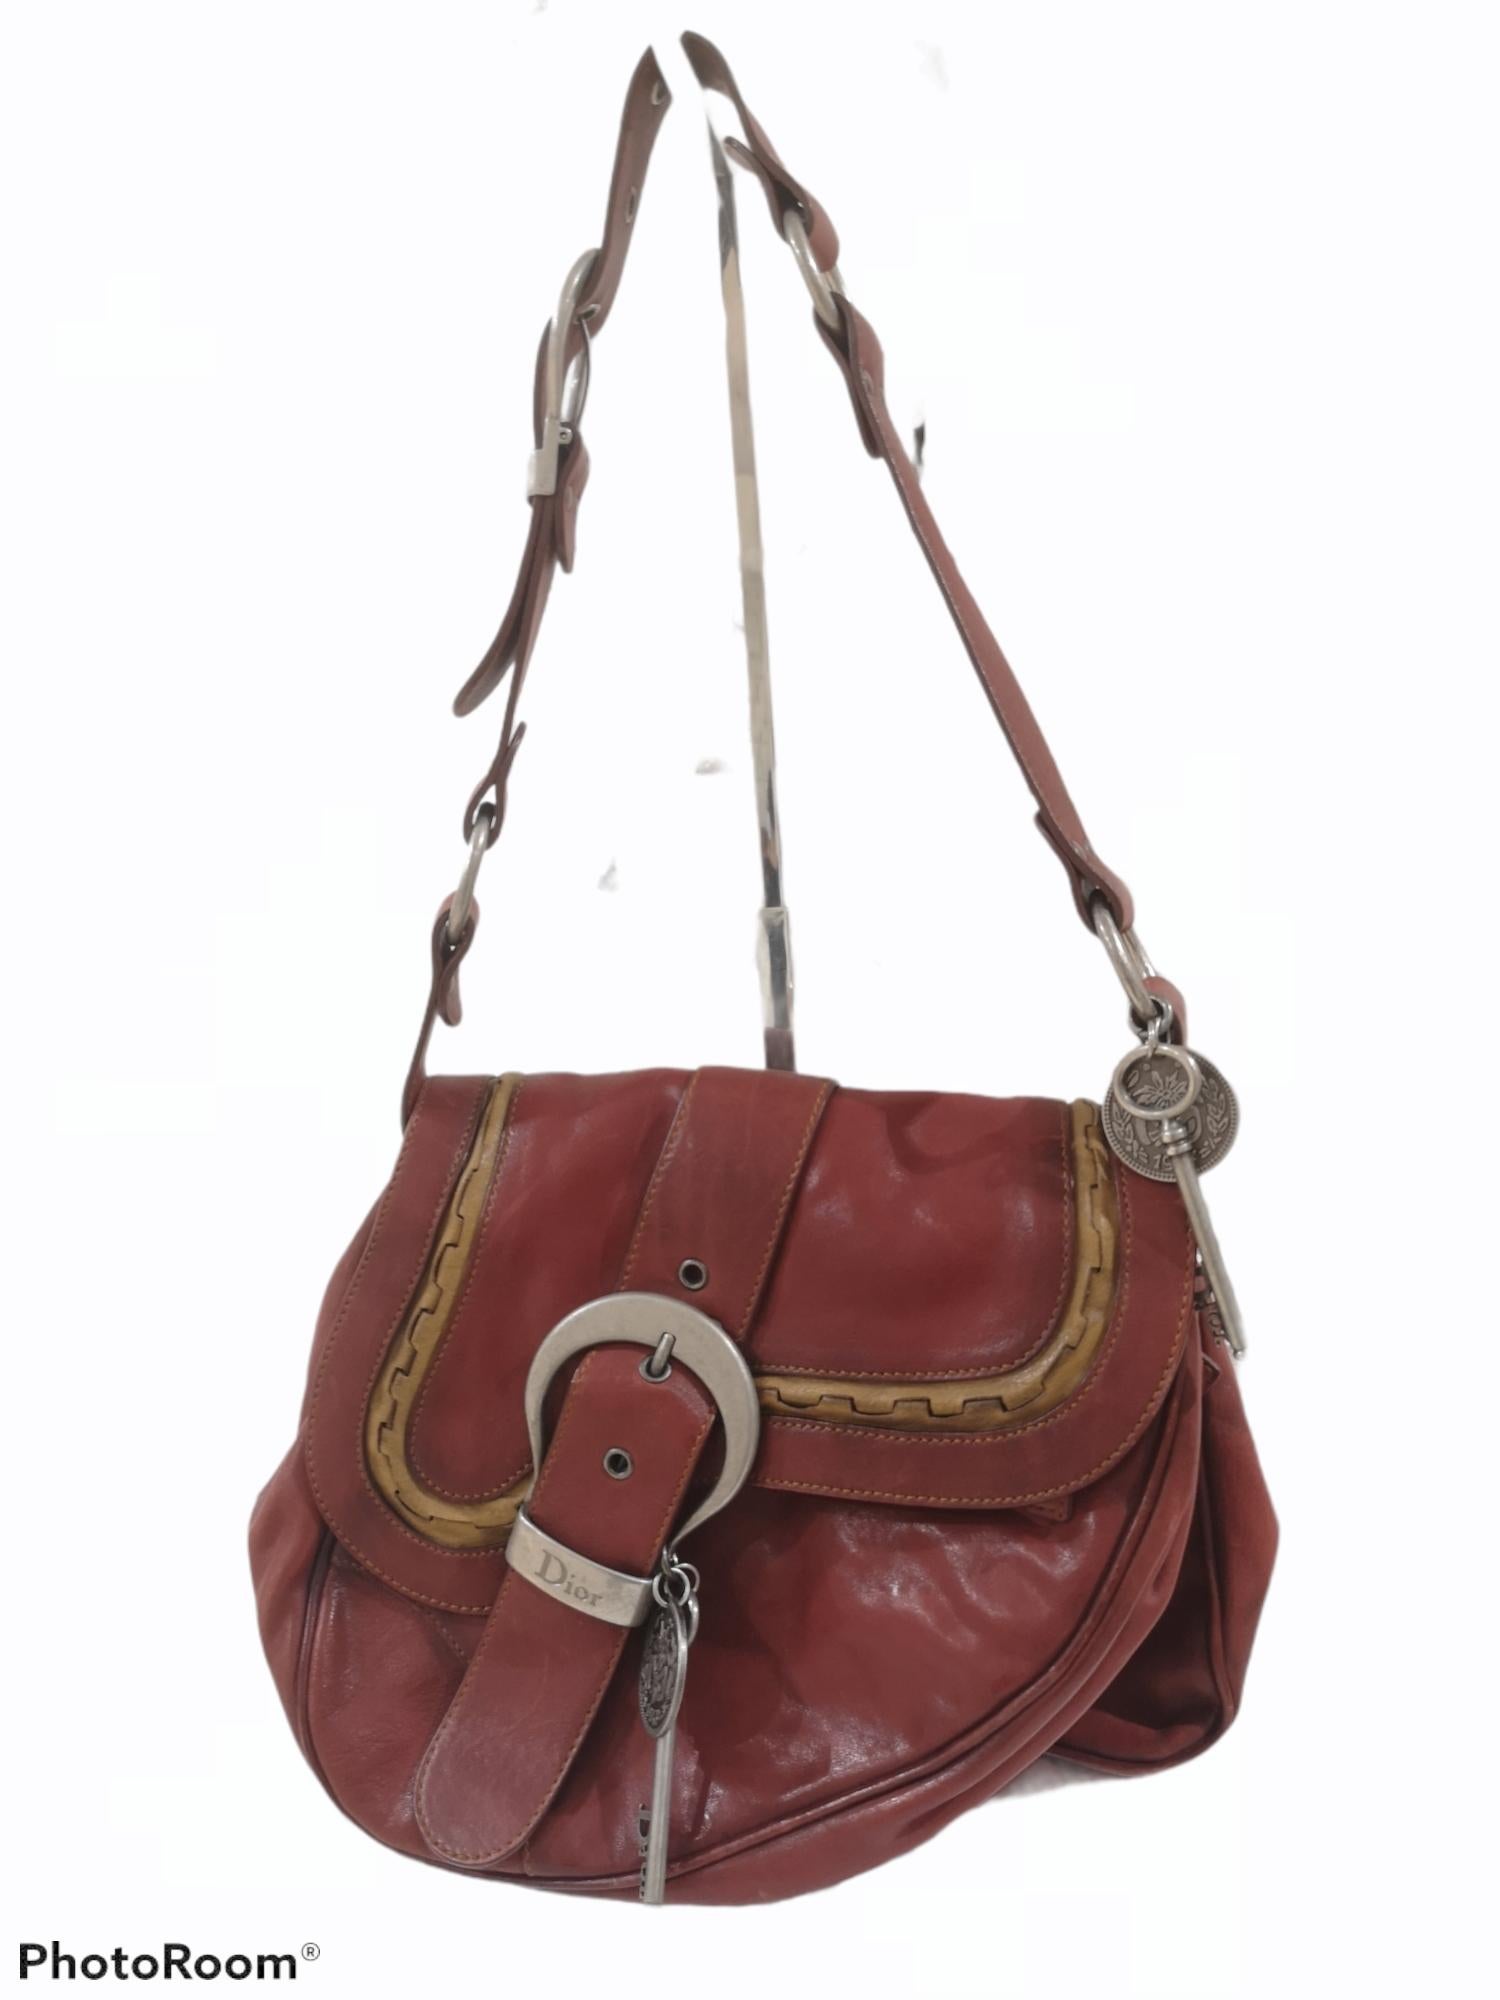 Christian Dior Gaucho saddle burgundy leather shoulder bag
embellished with silver hardware
front flap closure with buckle small front pocket and monogram lining
measurements: 24 * 29 cm, 5 cm depth